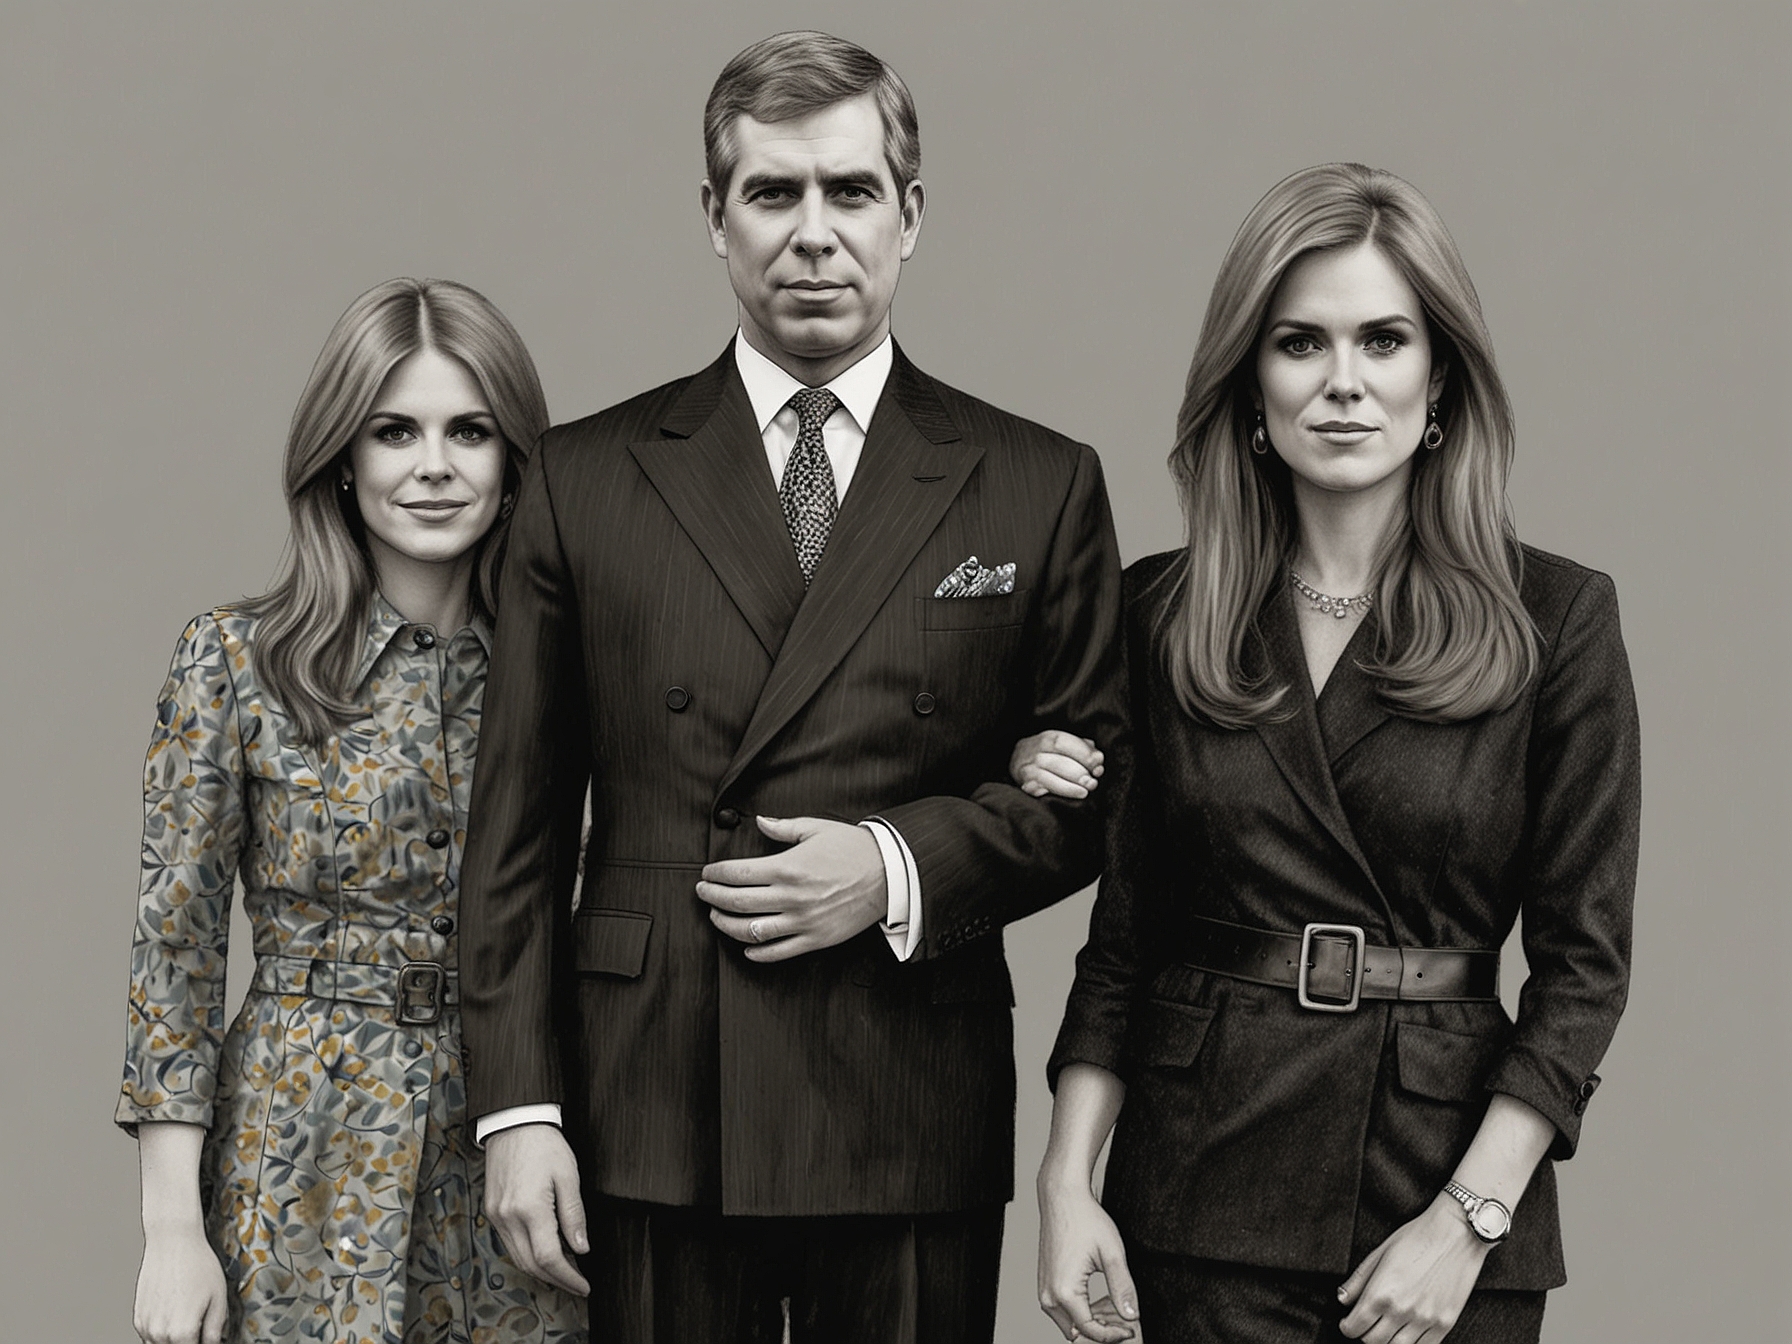 Prince Andrew standing apart from his ex-wife Sarah Ferguson and their daughters. The image underscores the speculation around their relationship dynamics, especially amid ongoing controversies.